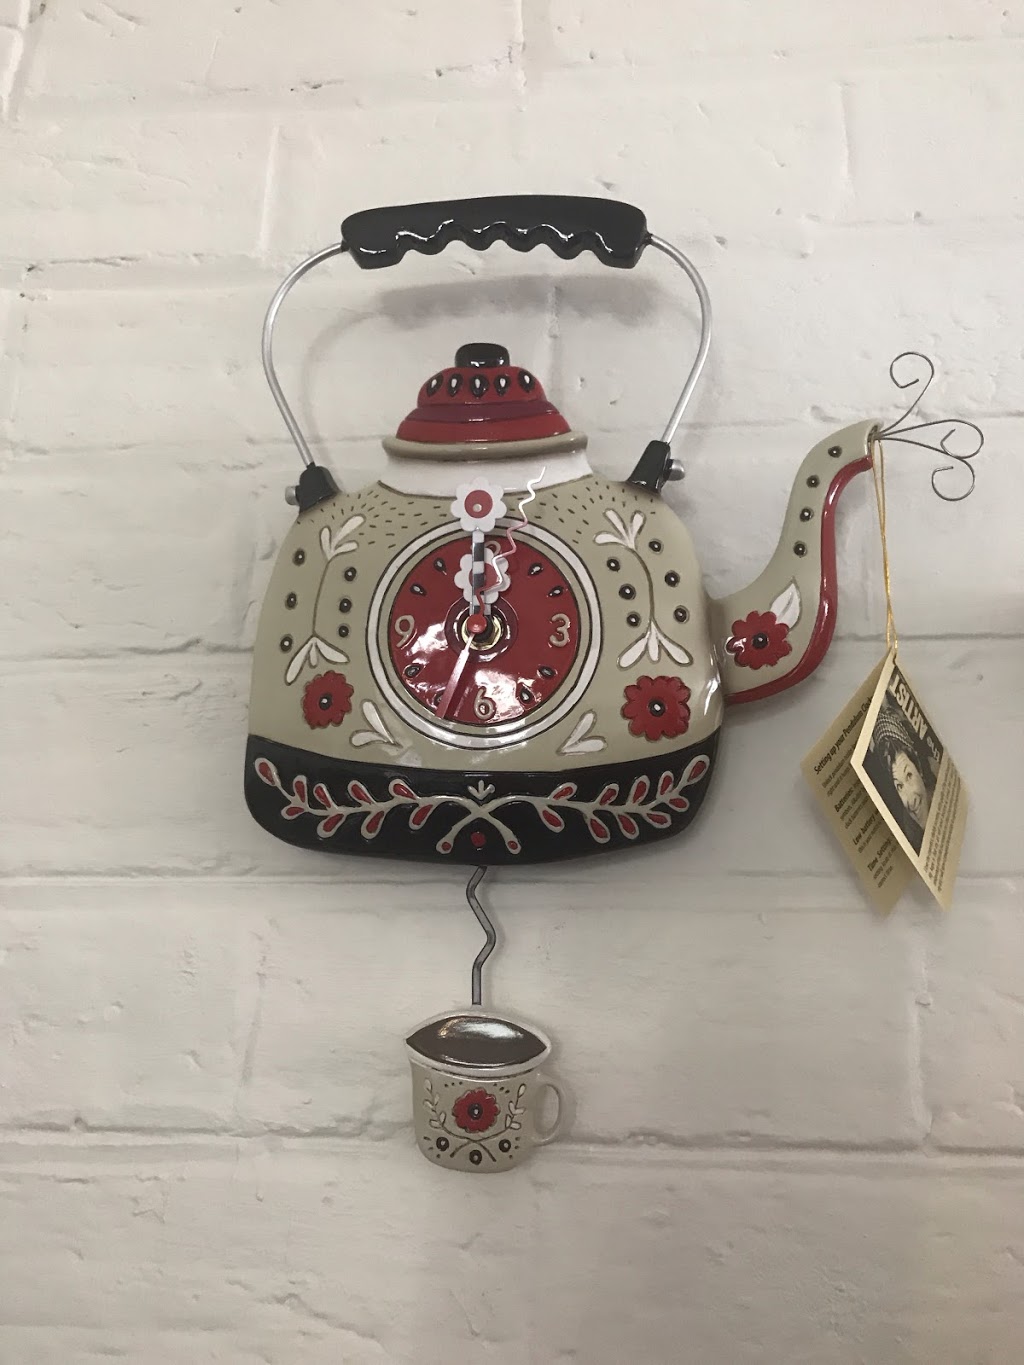 Eclectopia Gifts & Specialty Homewares | jewelry store | Shops 2 & 3, 79 Orchard St, Taralga NSW 2580, Australia | 0468934483 OR +61 468 934 483